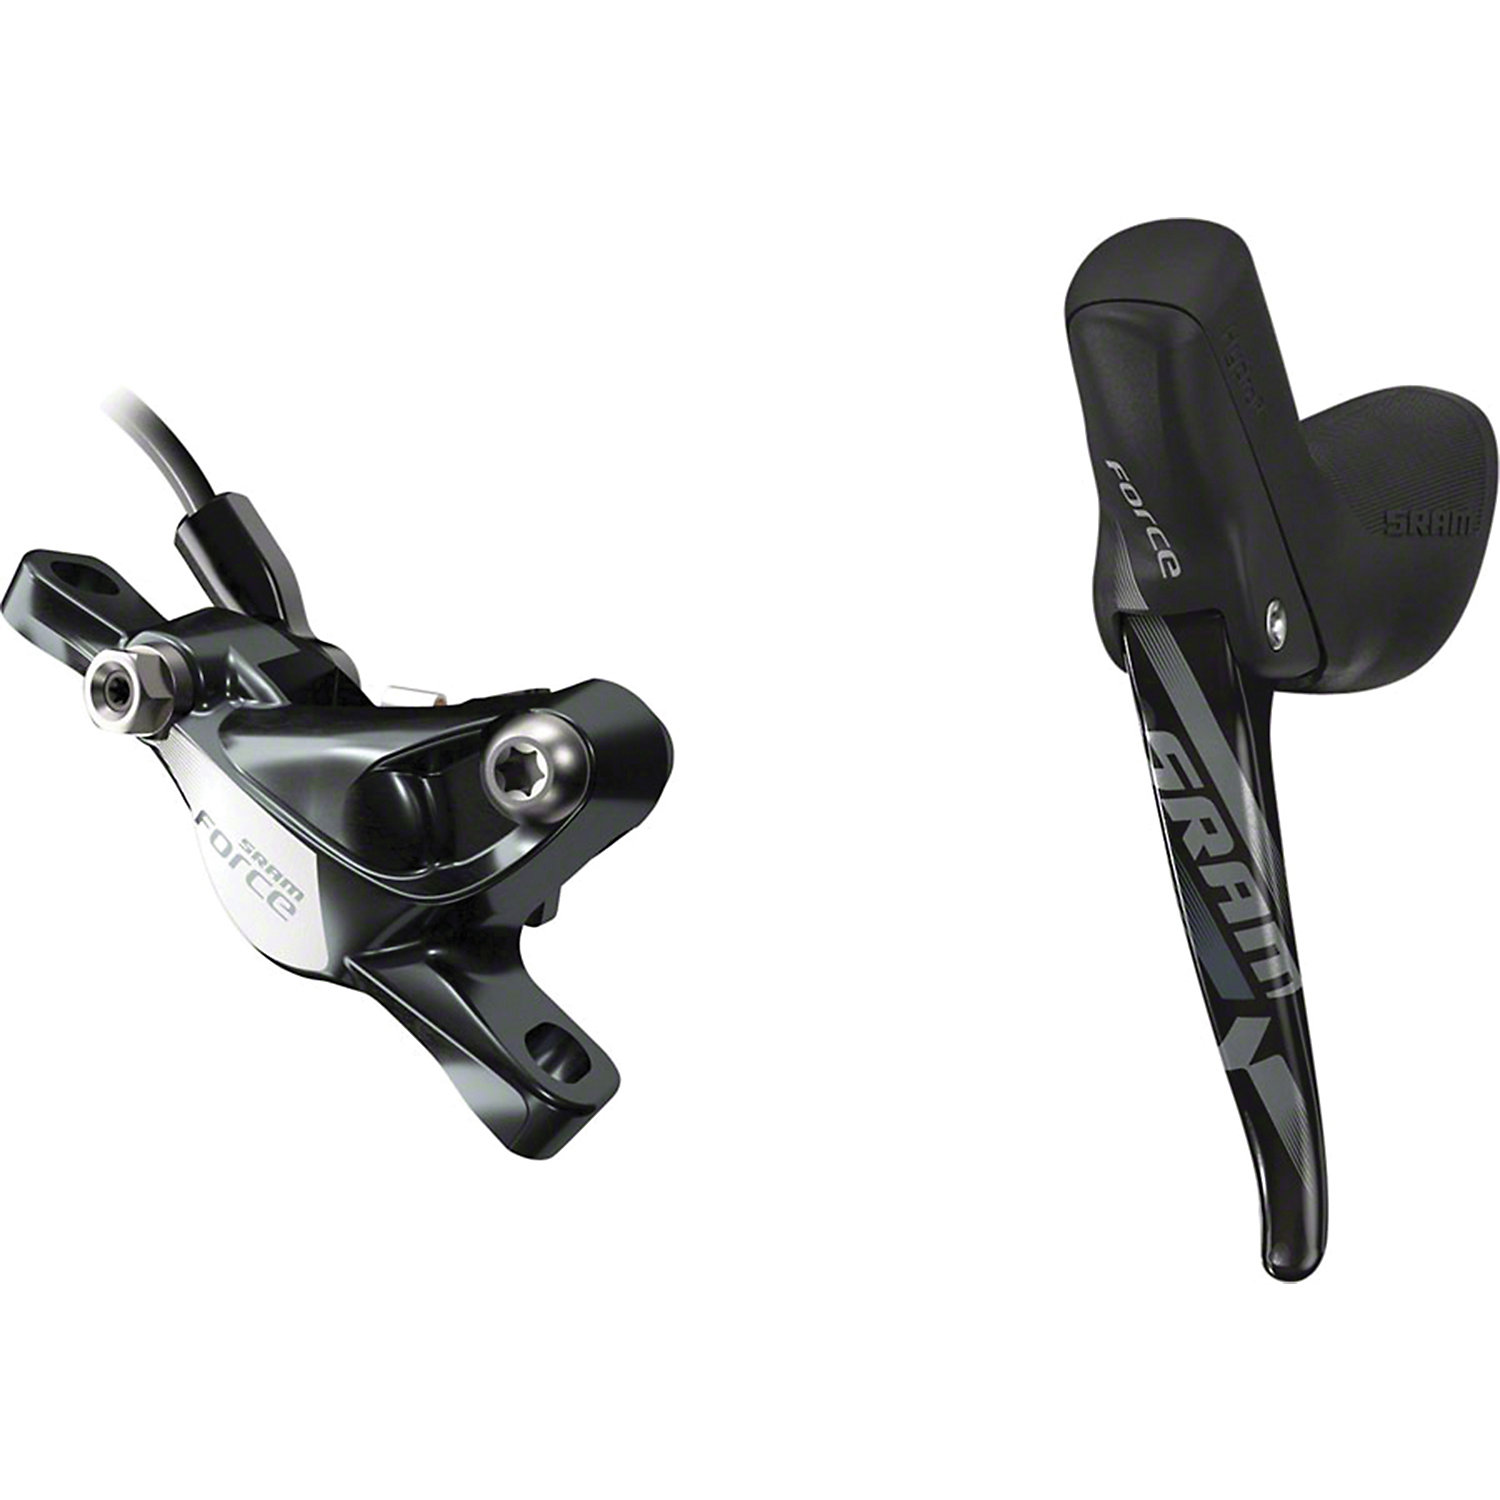 SRAM Force 1 11 Speed Left Front Hydraulic Disc Brake and Brake Lever